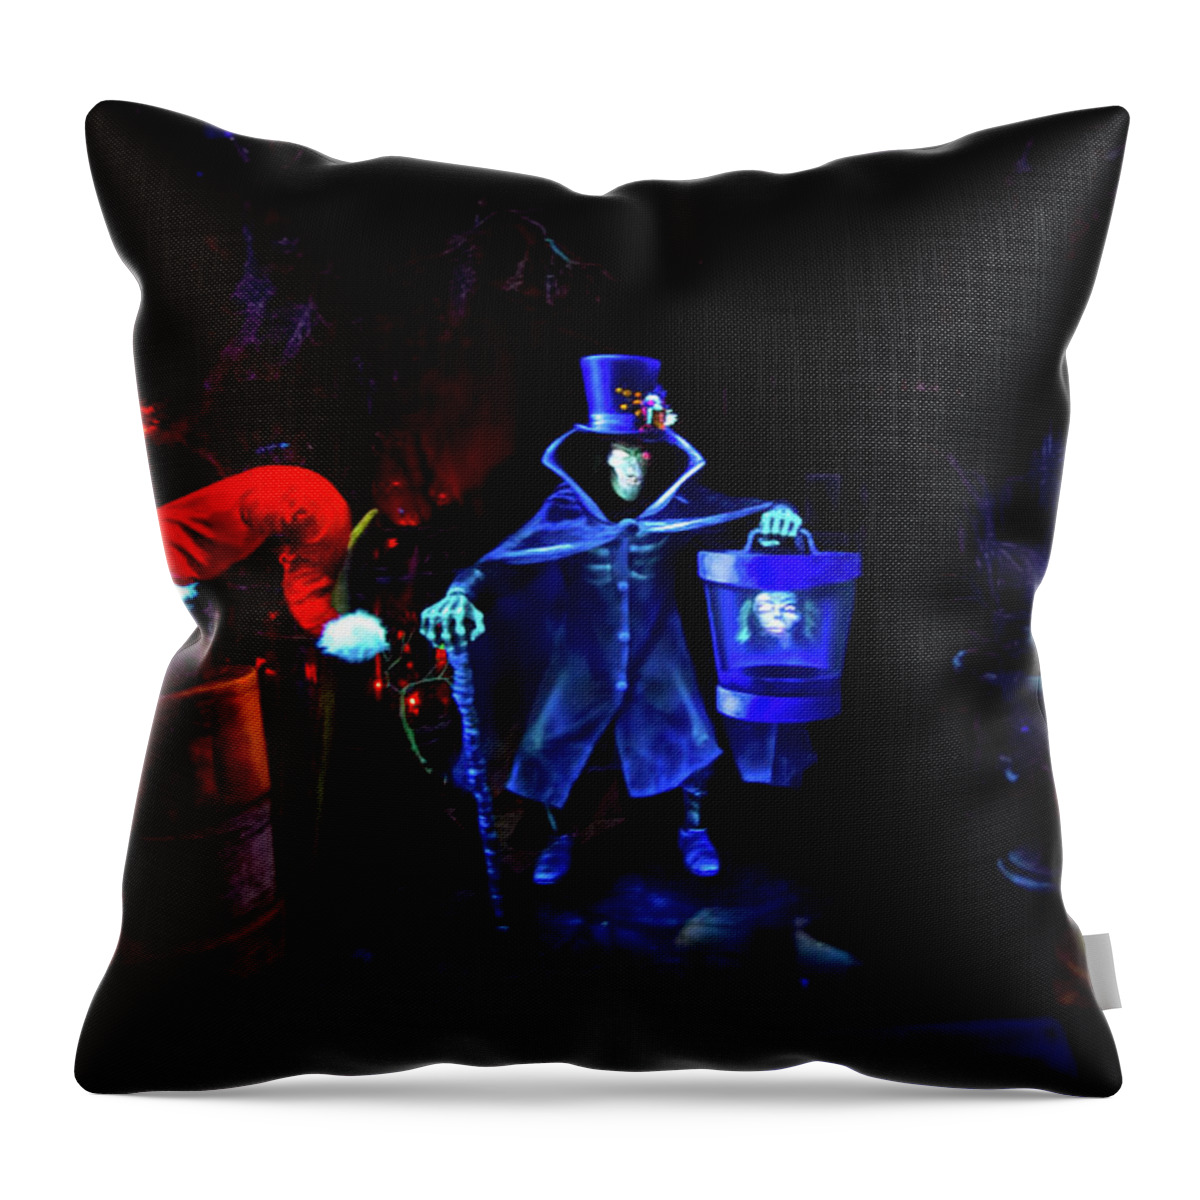 Magic Kingdom Throw Pillow featuring the photograph A Haunted Mansion Nightmare by Mark Andrew Thomas